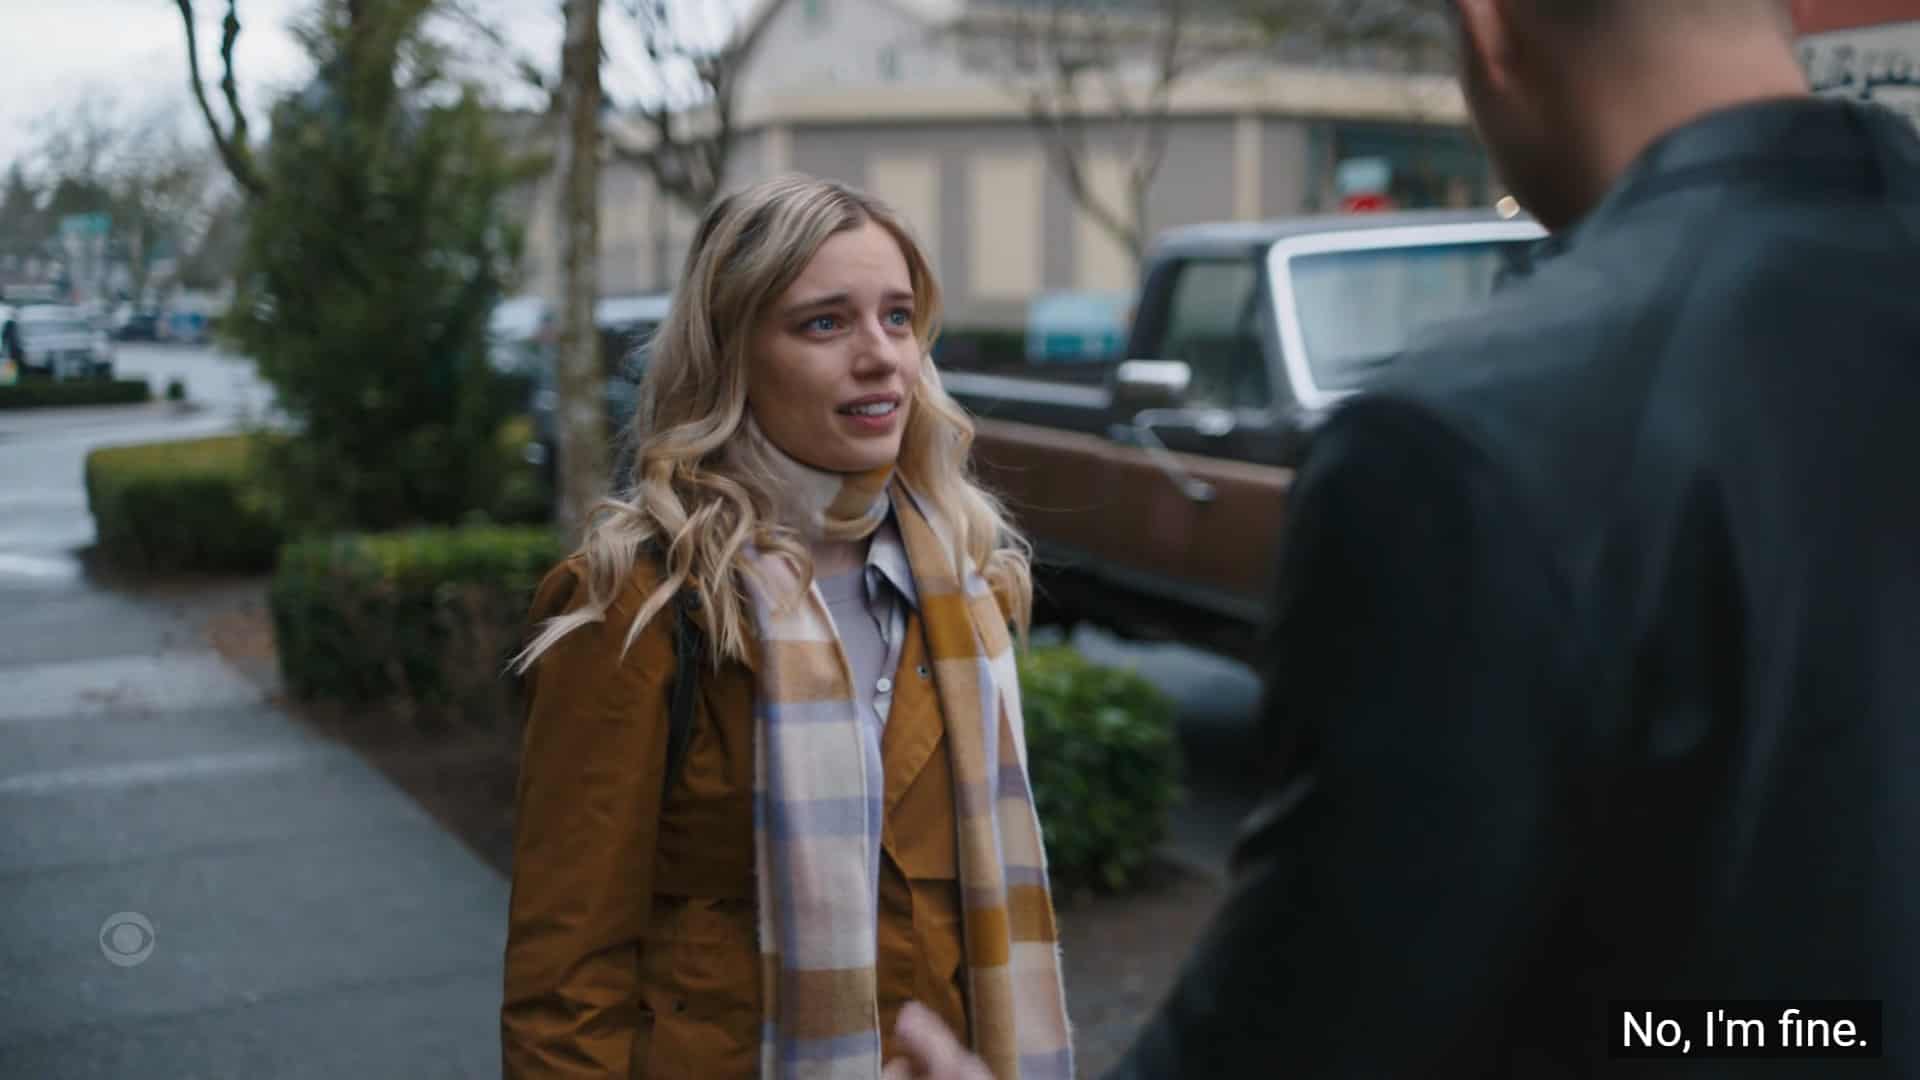 Kira (Anja Savcic) checking in with Colter after his altercation with Tom